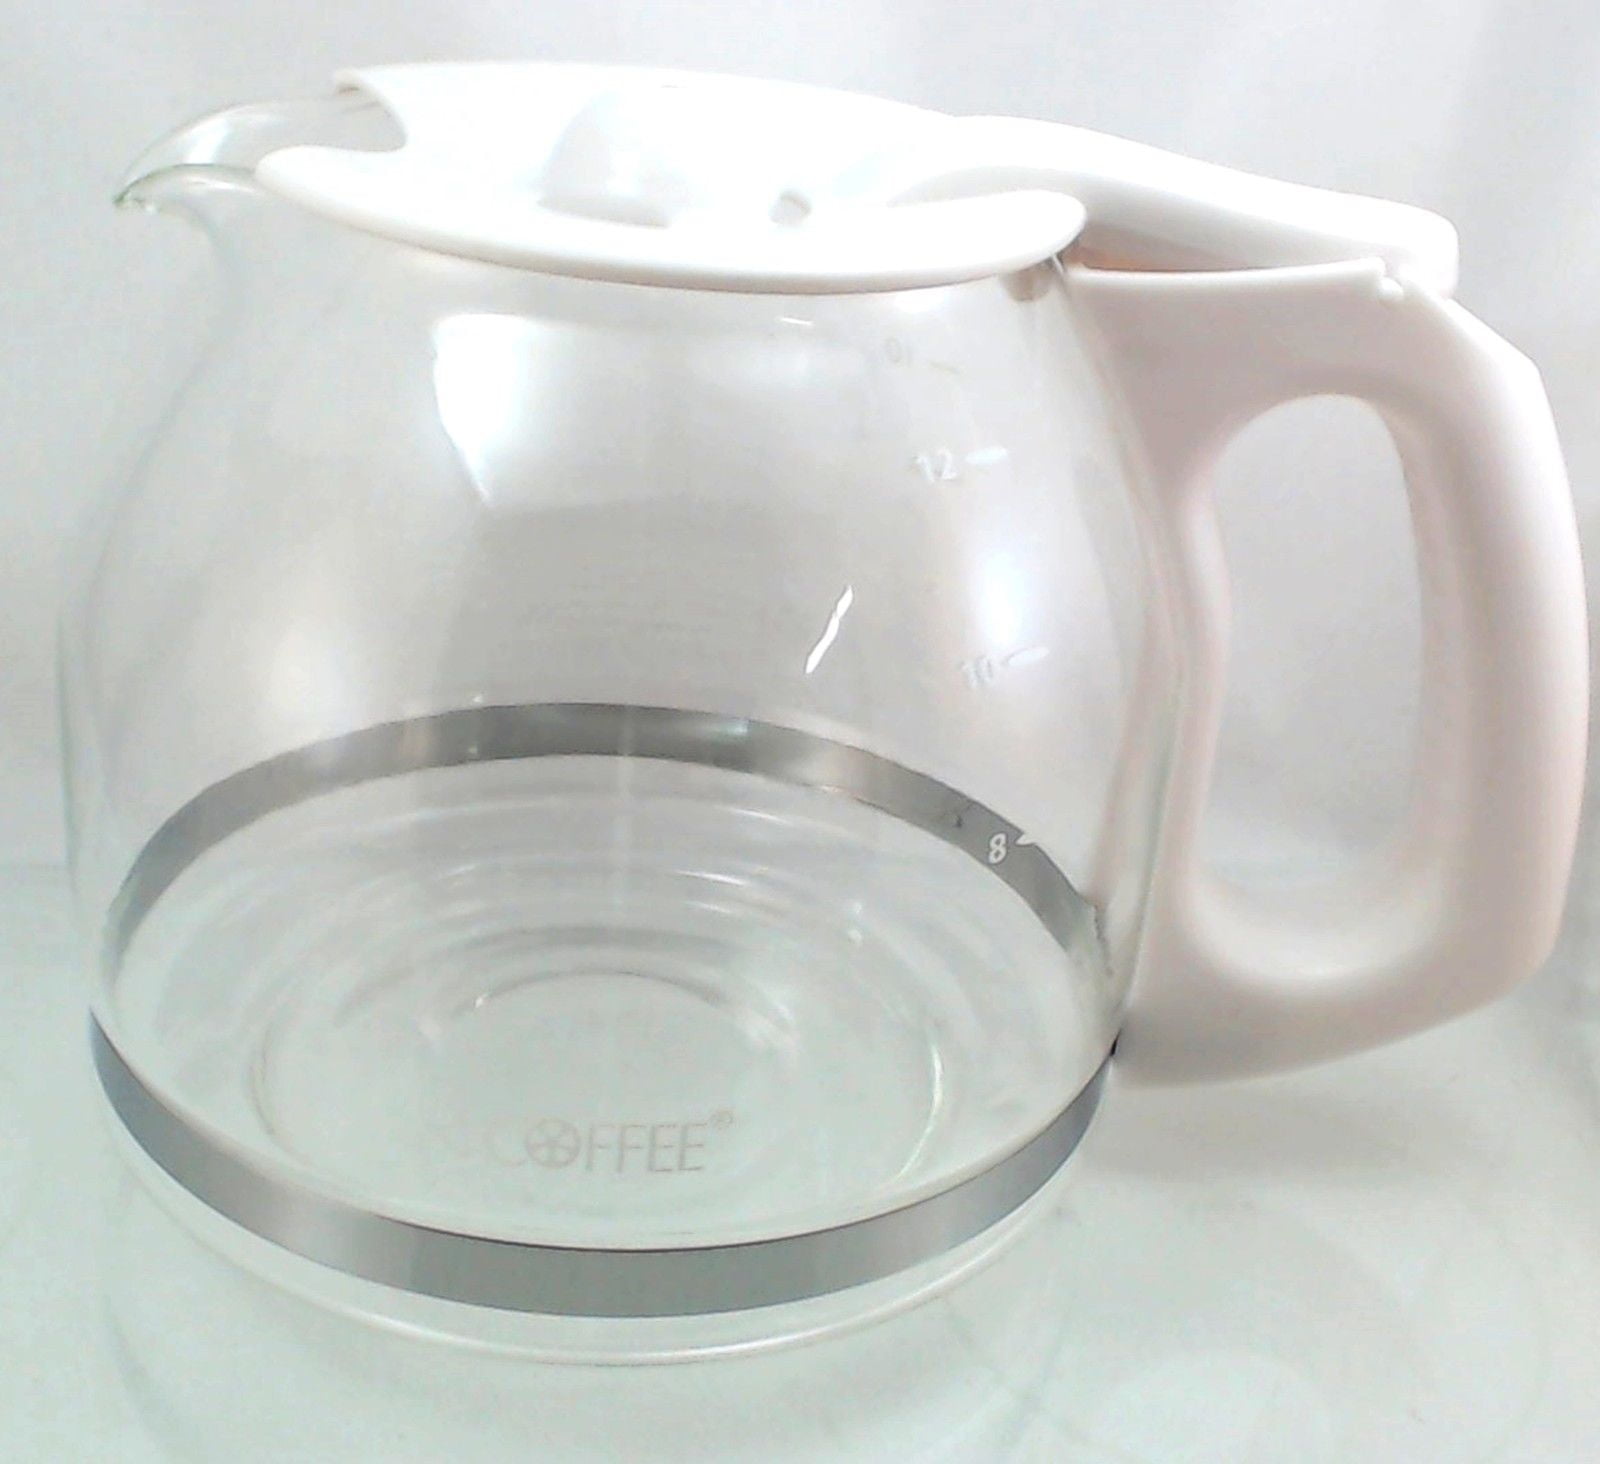 Mr Coffee 10 Cup Carafe White No Chips or Cracks 